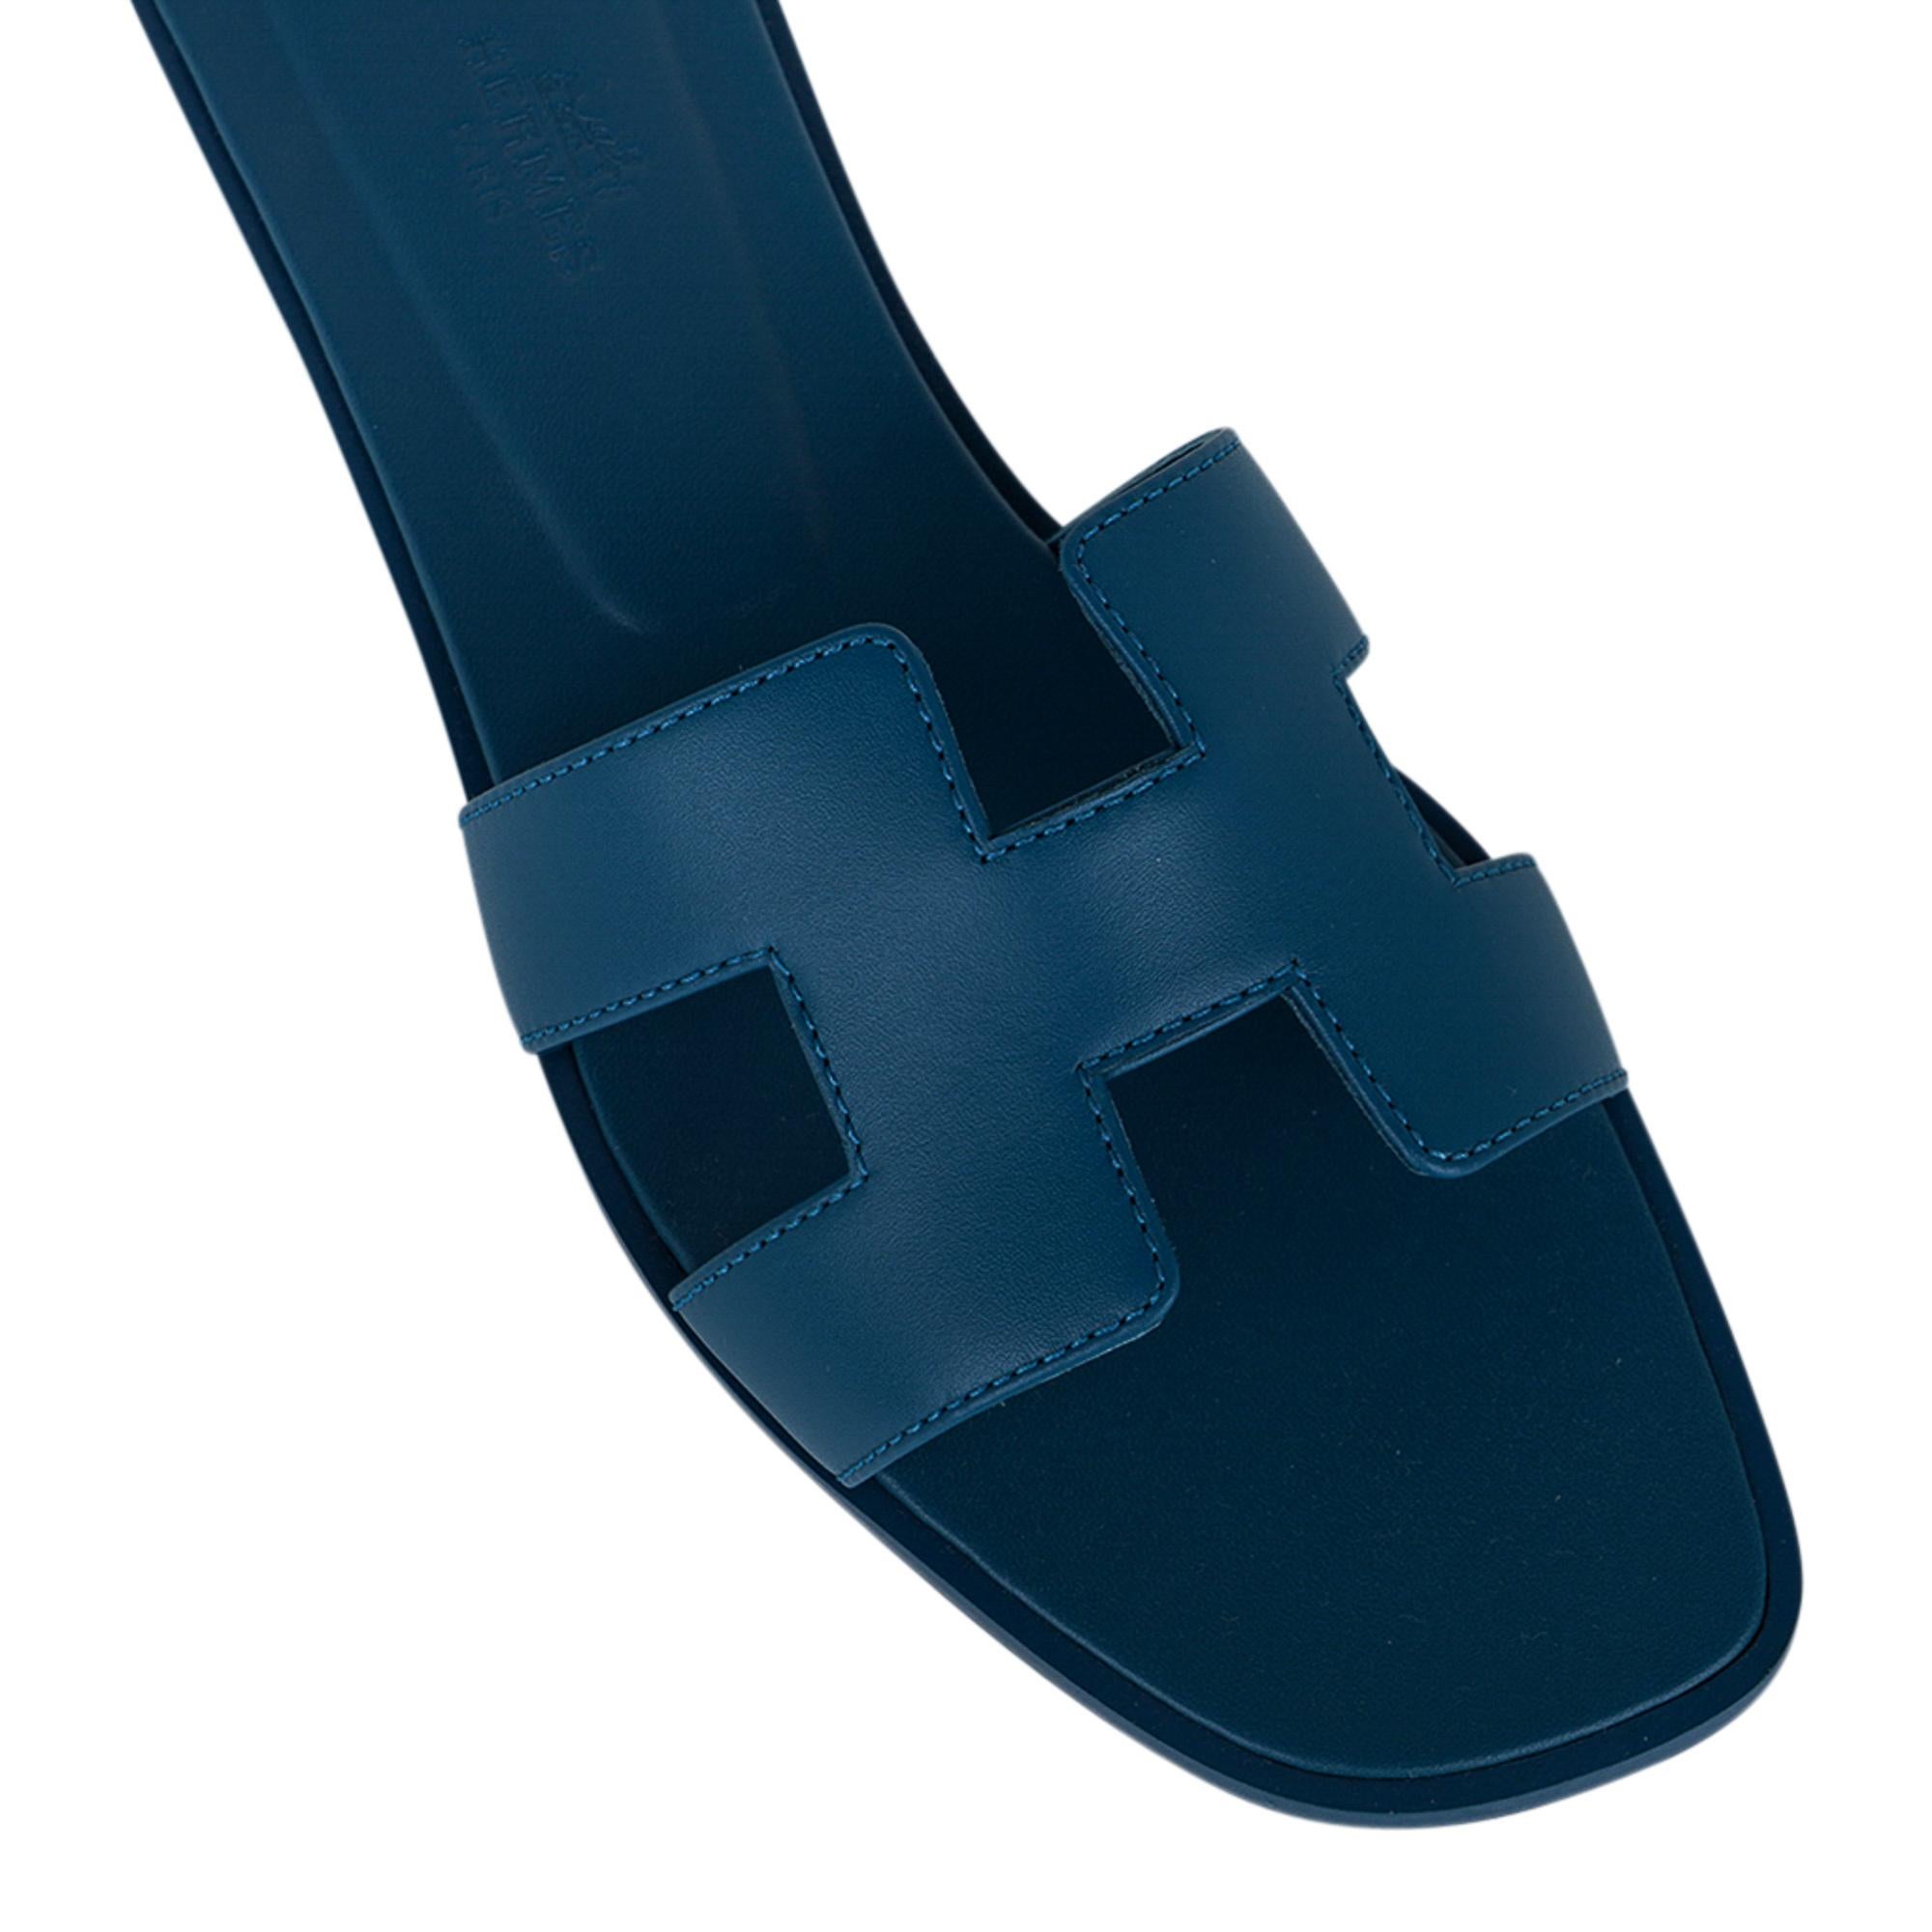 Mightychic offers Hermes Oran flat sandals featured in Bleu Velvet.
This stunning box calfskin leather Hermes Oran slide sandal is in a richly saturated blue hue - stunning.
The iconic H cutout over the top of the foot.
Matching embossed calfskin